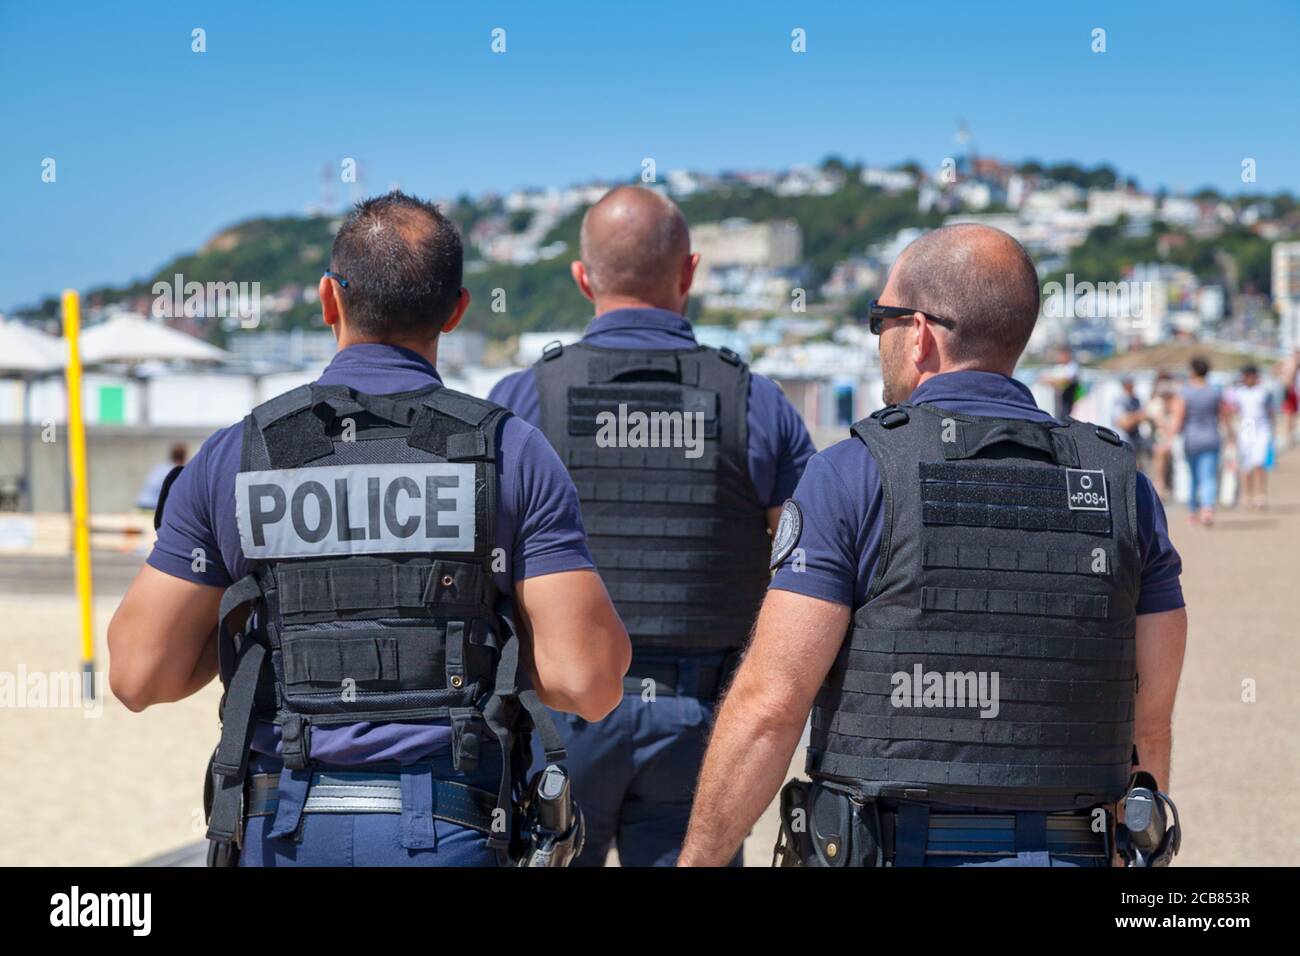 Le Havre, France - August 05 2020: Group of policemen in bulletproof vest patrolling at the beach. Stock Photo